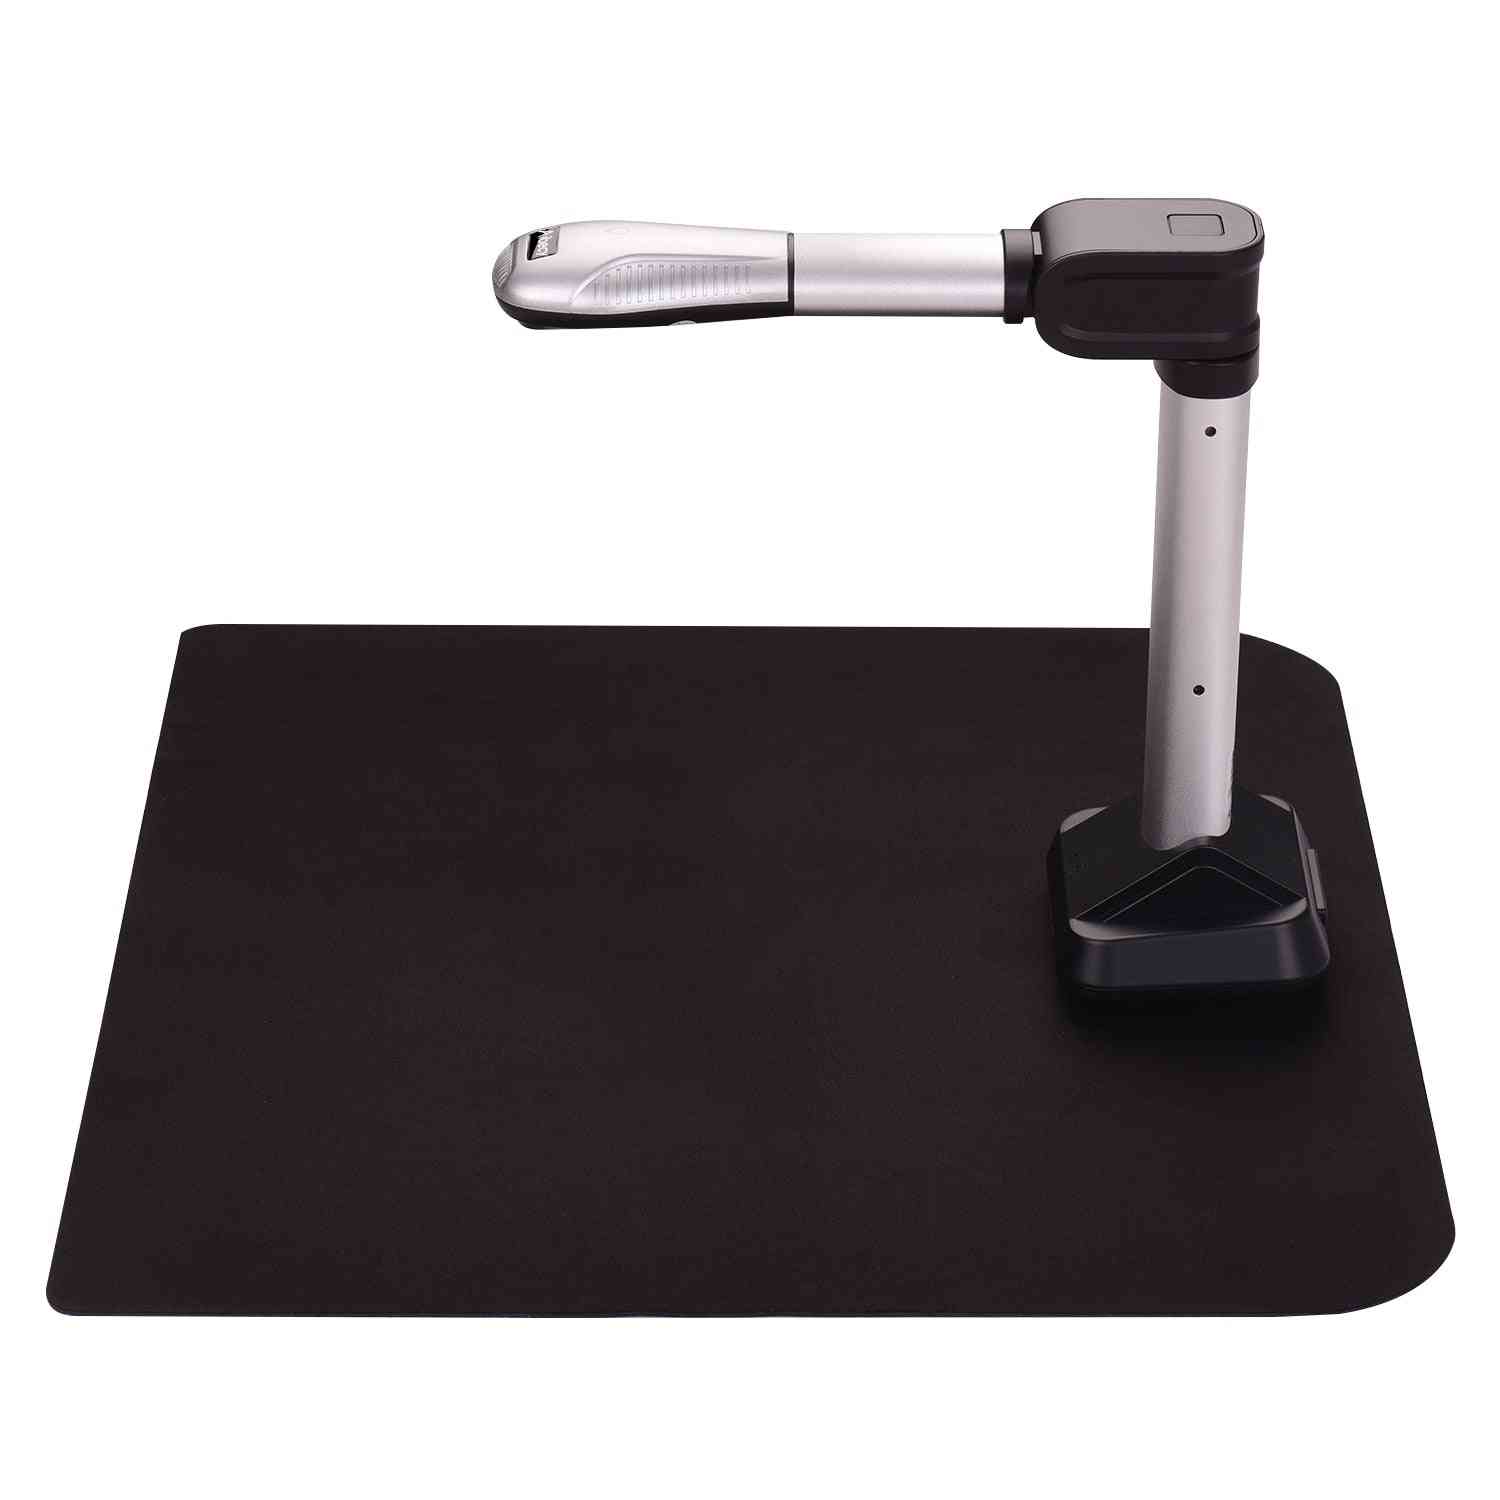 Usb Document Camera Scanner High Speed With Led Light